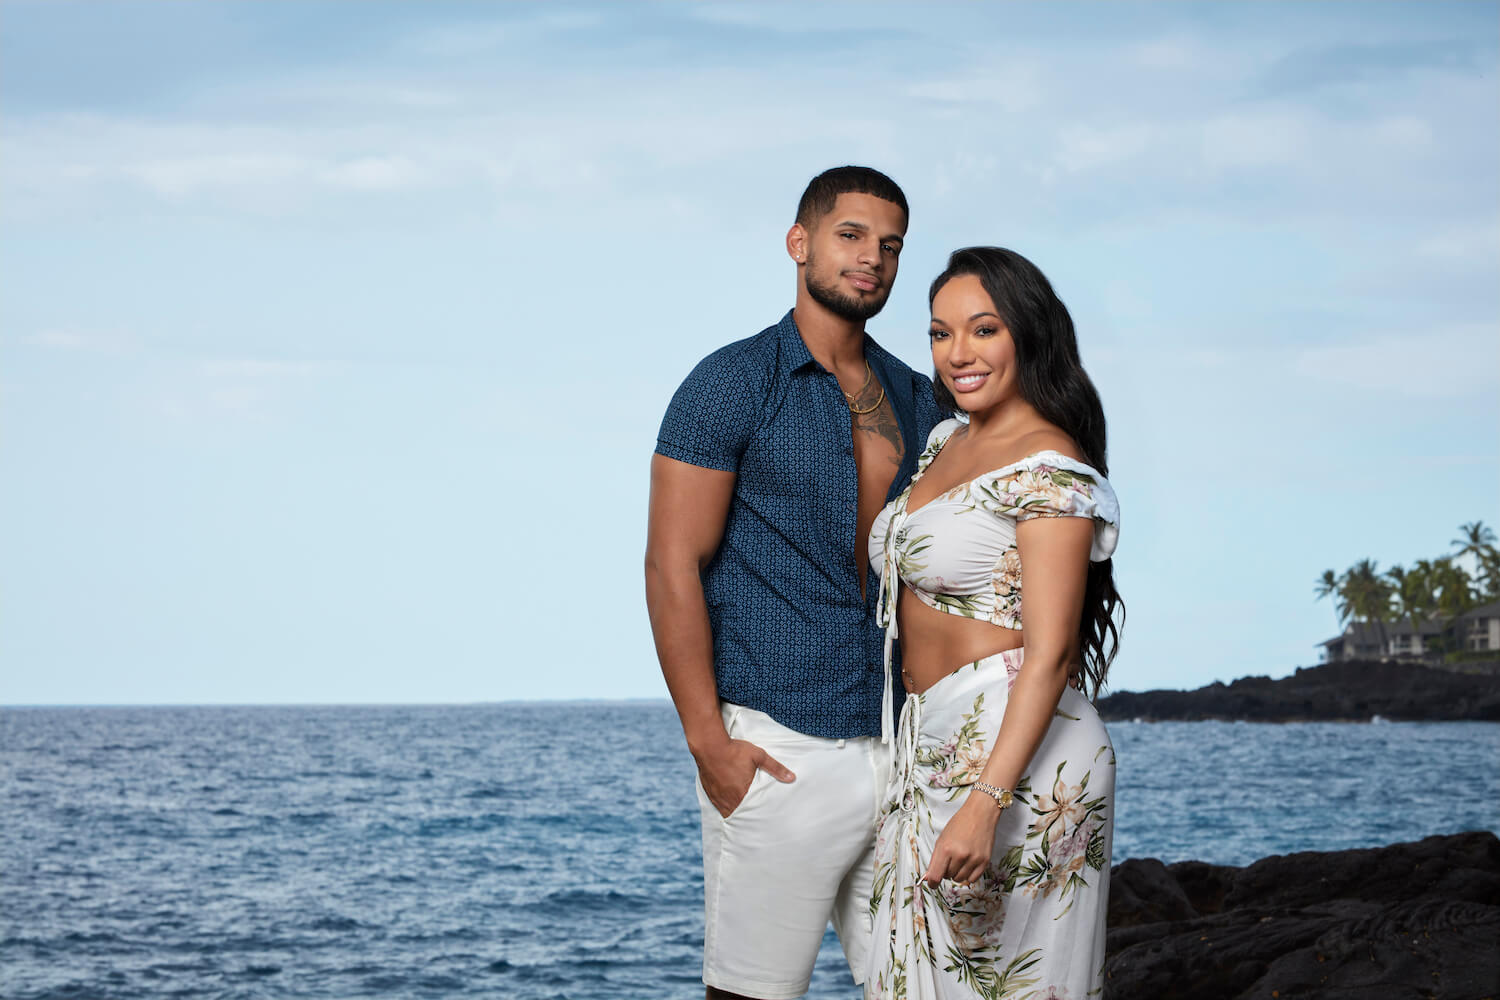 'Temptation Island' Season 5 Premiere Date, Time, and How to Watch